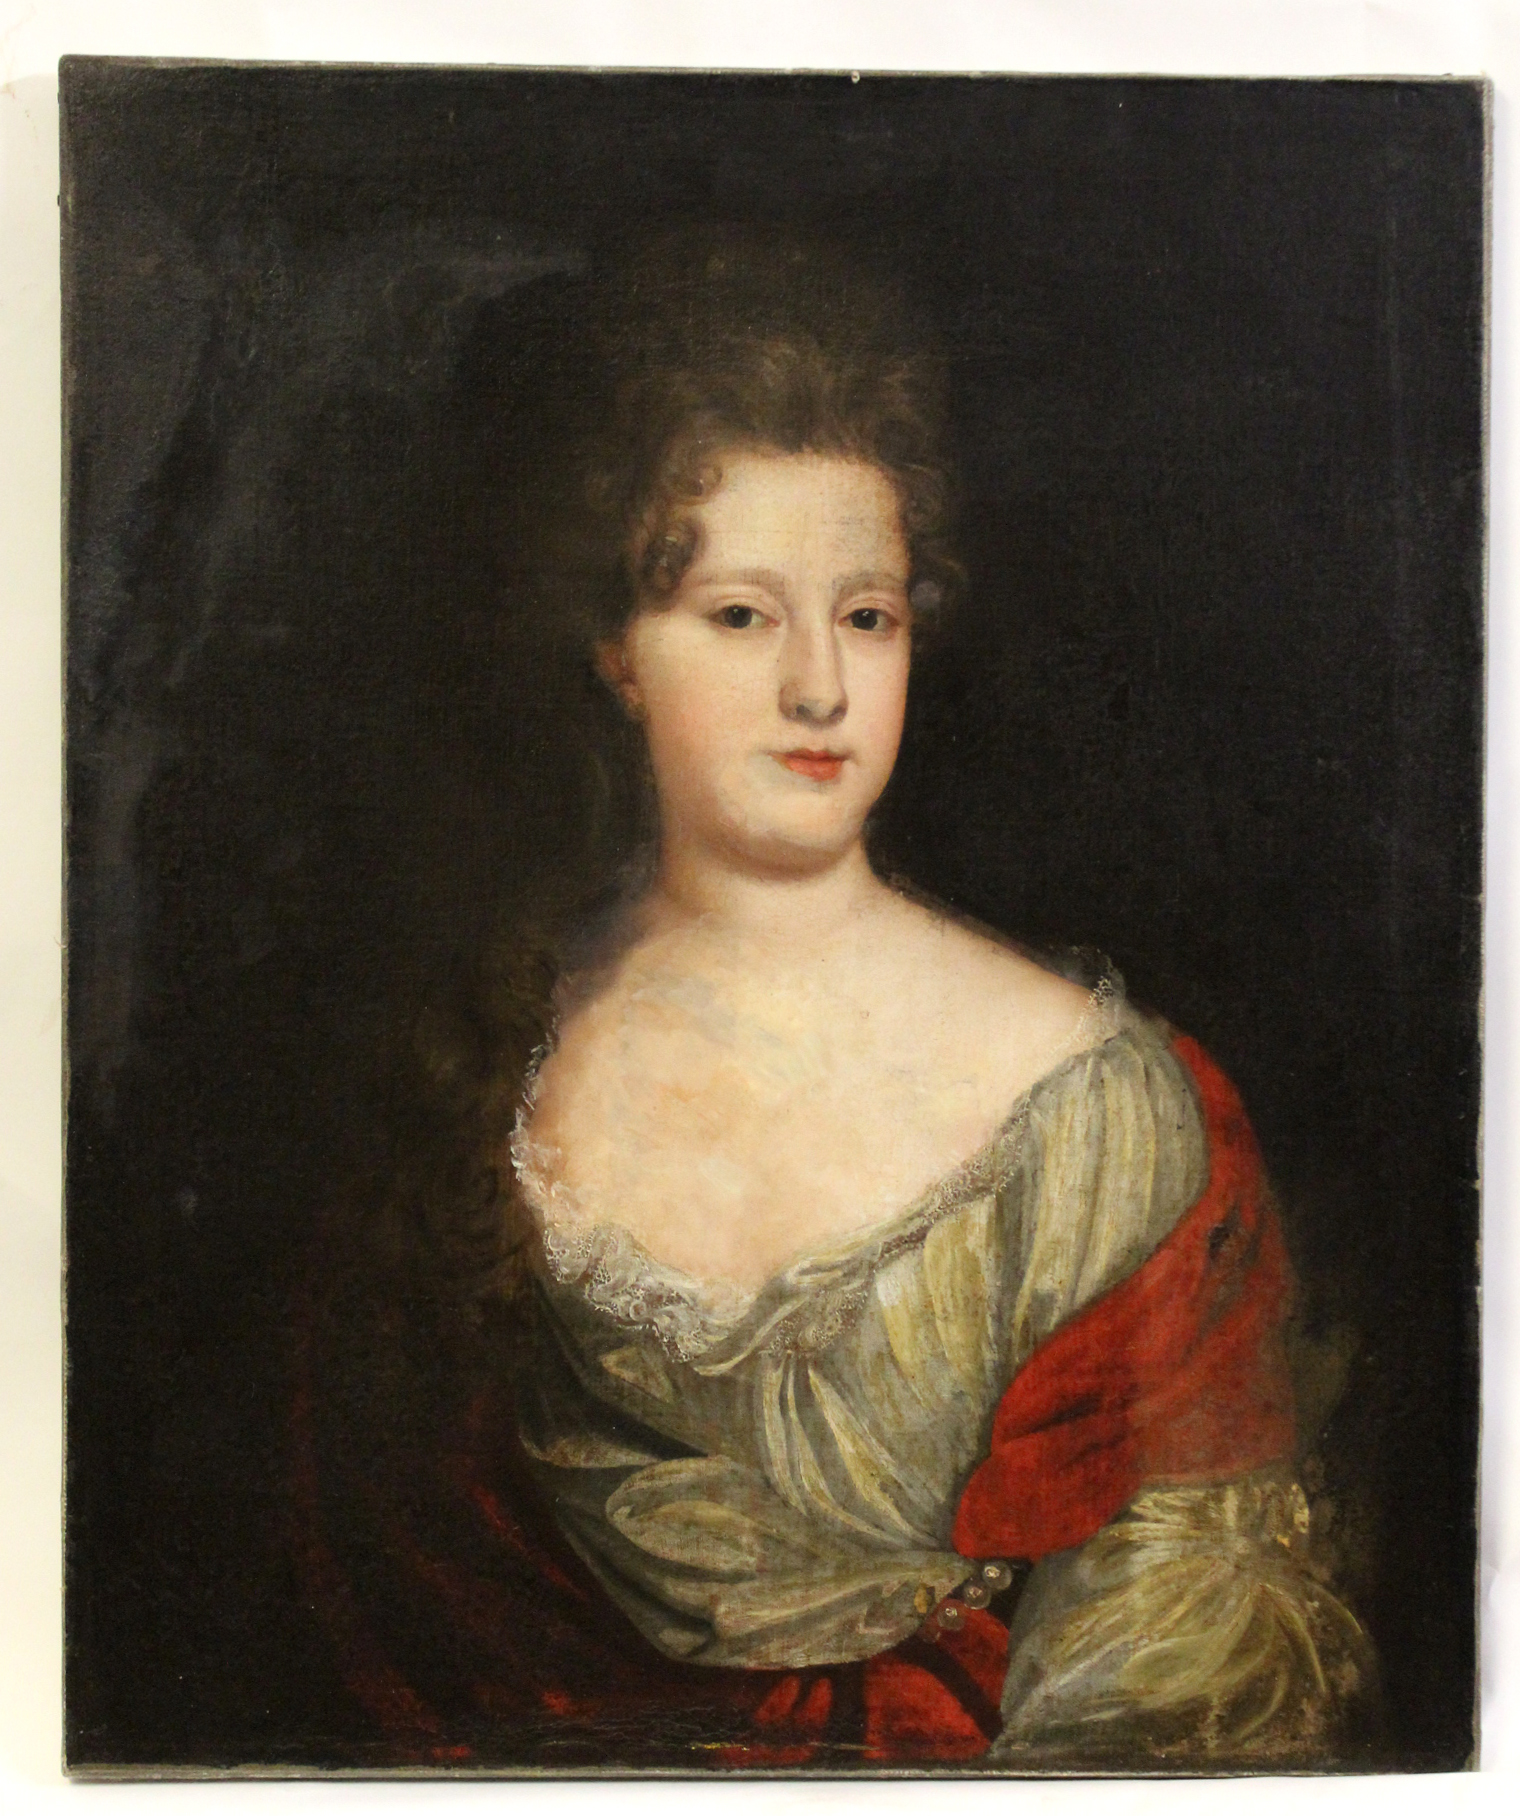 English School (18th century) Portrait of a lady, oil on canvas, 77 x 64cm, unframed - Image 2 of 2